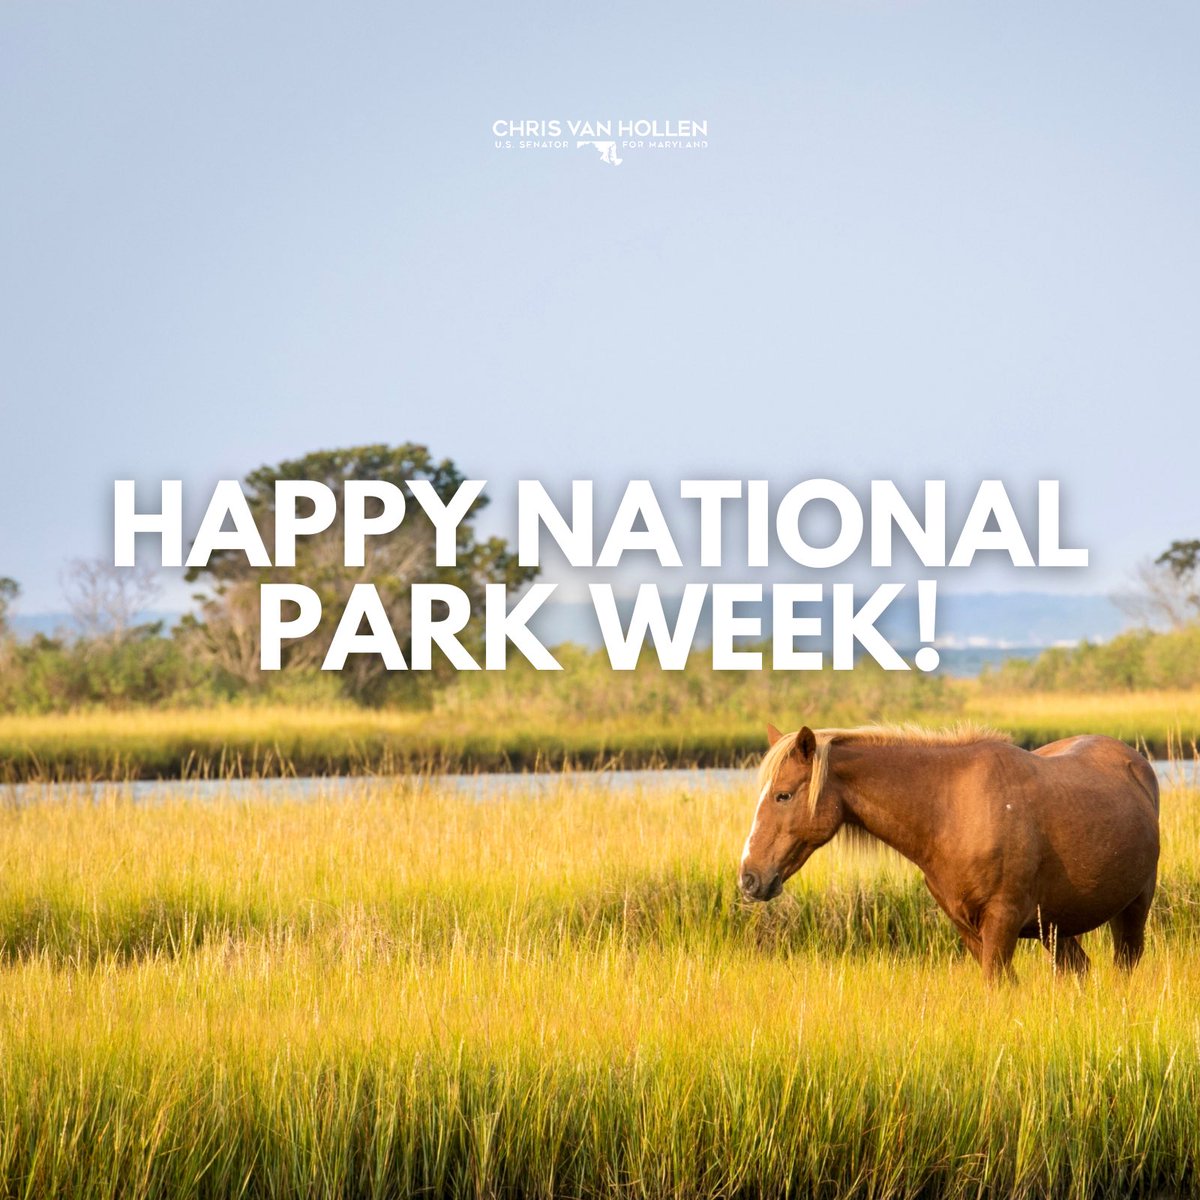 MD has some of our most beautiful national parks, including Assateague Island National Seashore shown below. From Assateague to Catoctin, we must protect our national wonders — including by passing my & @RepSarbanes’s Chesapeake National Recreation Area Act! #NationalParkWeek🏞️